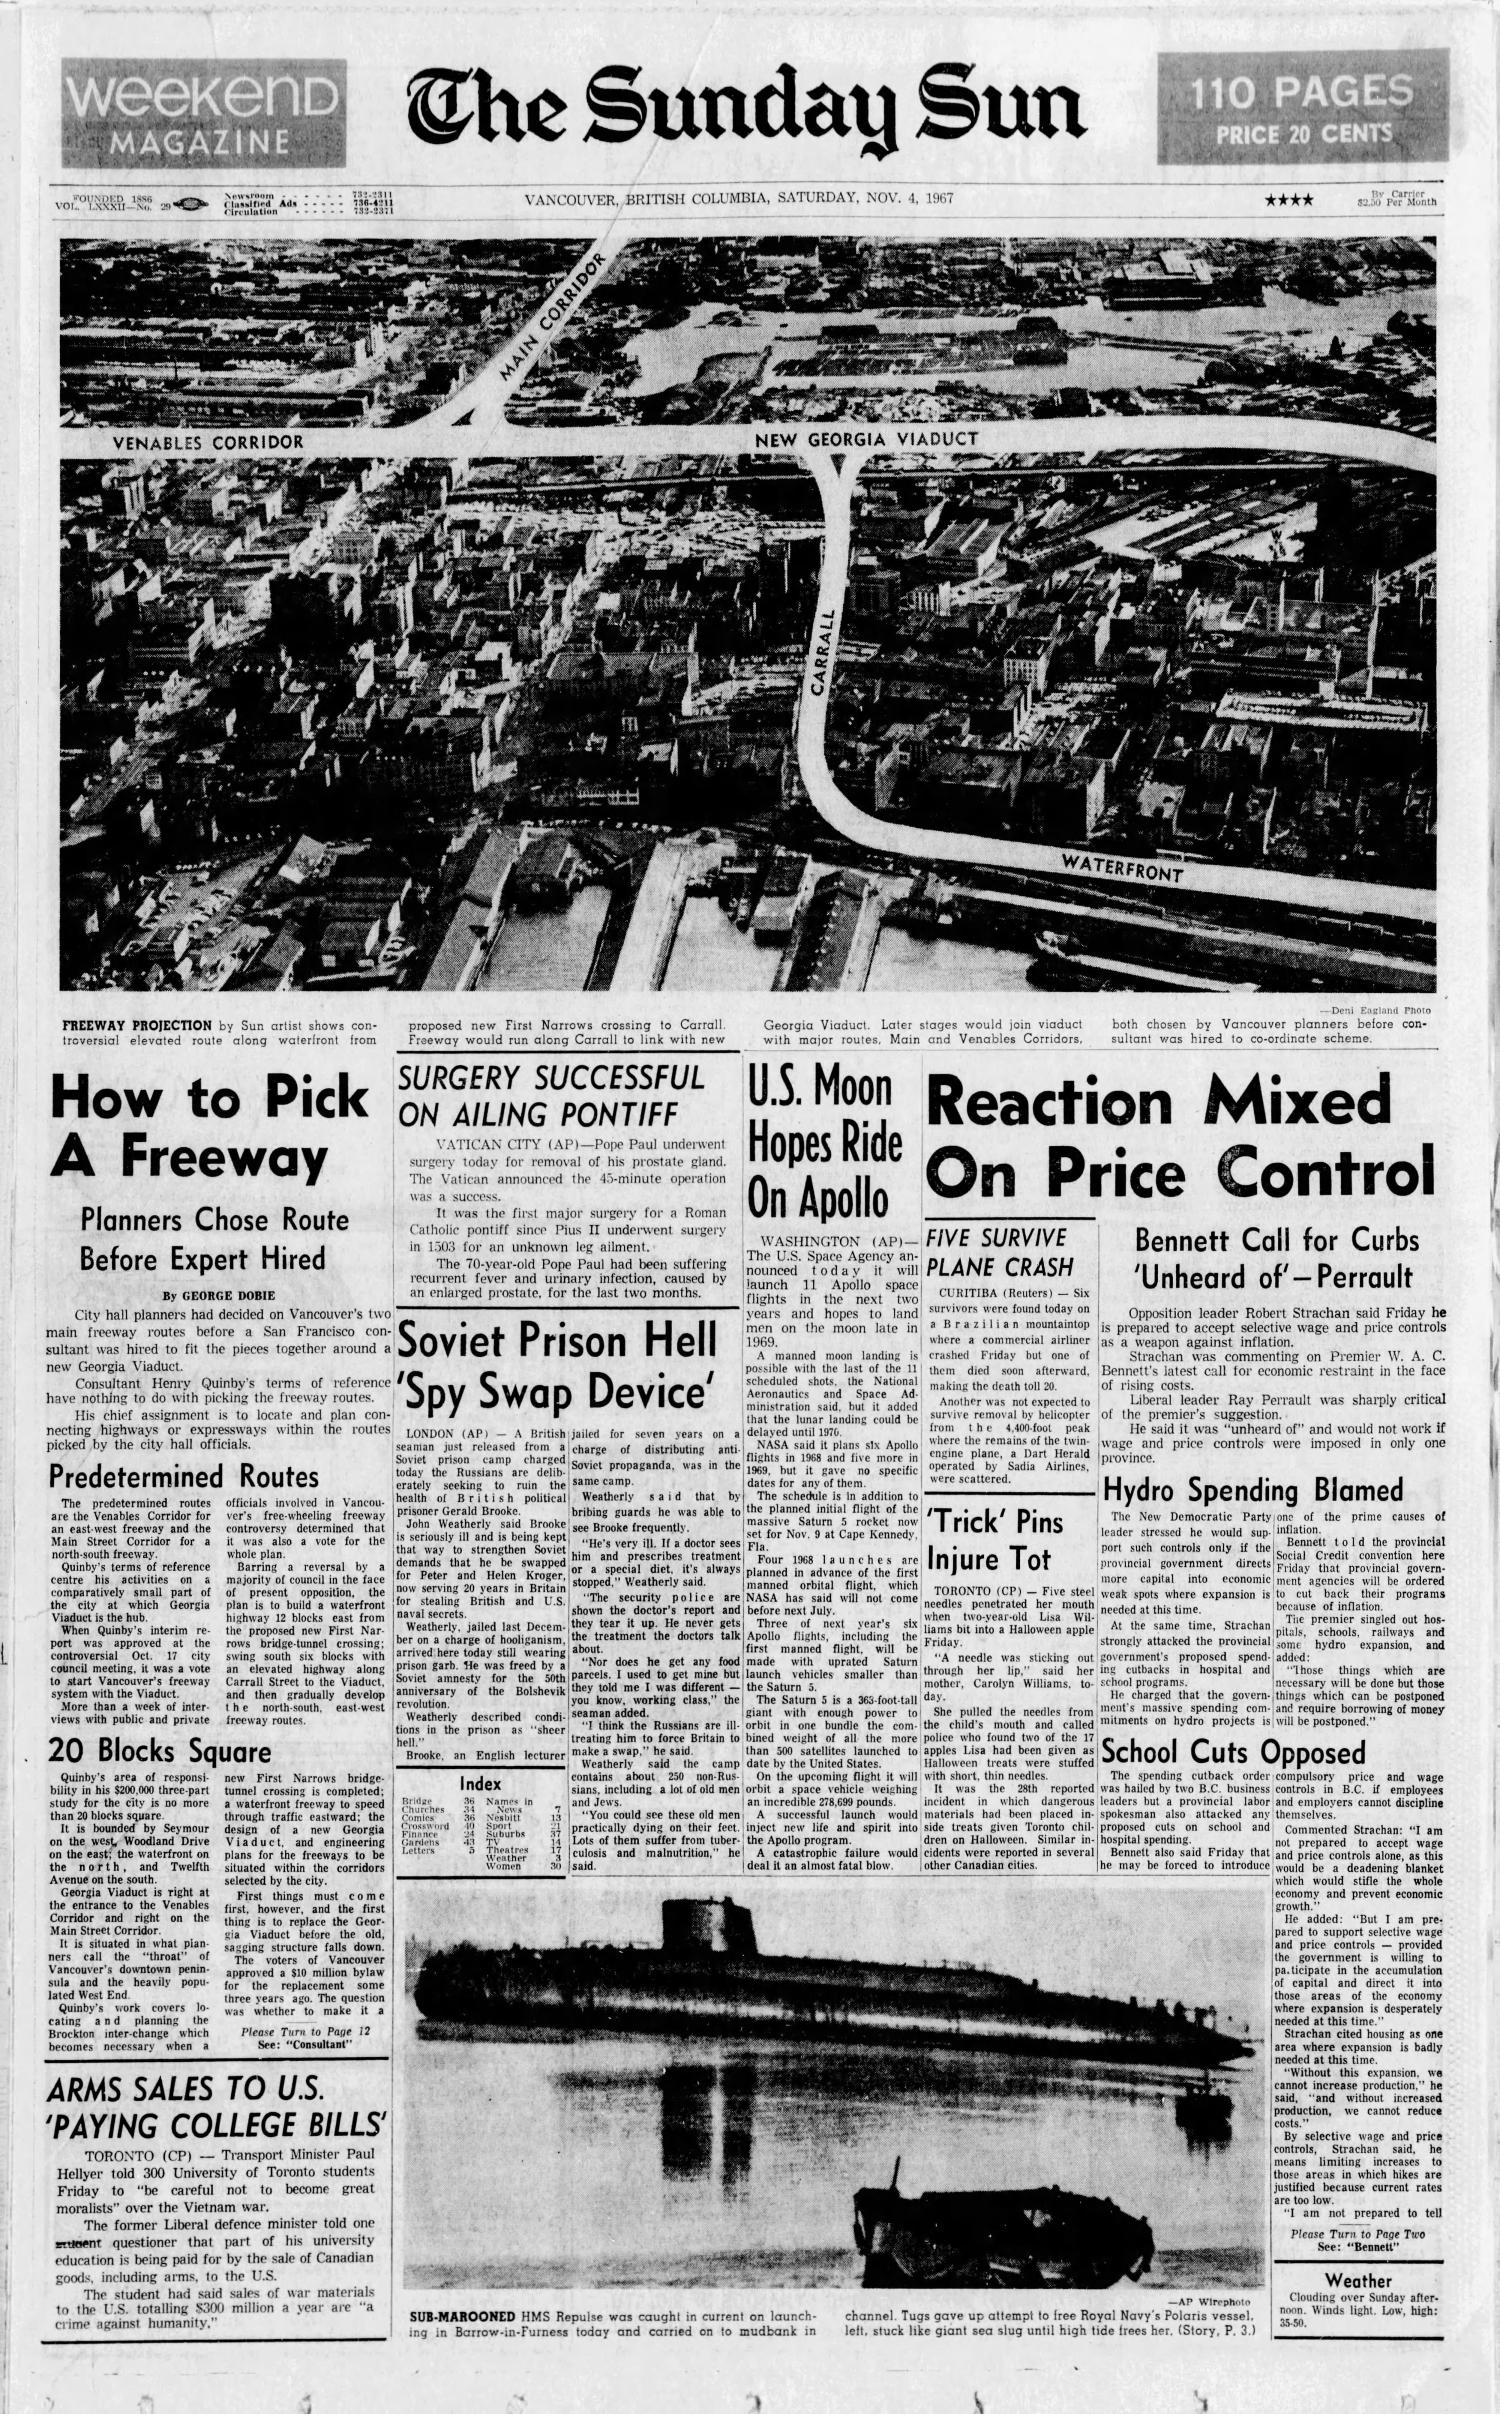 Vancouver Sun article from 1967 about proposed downtown freeway project.